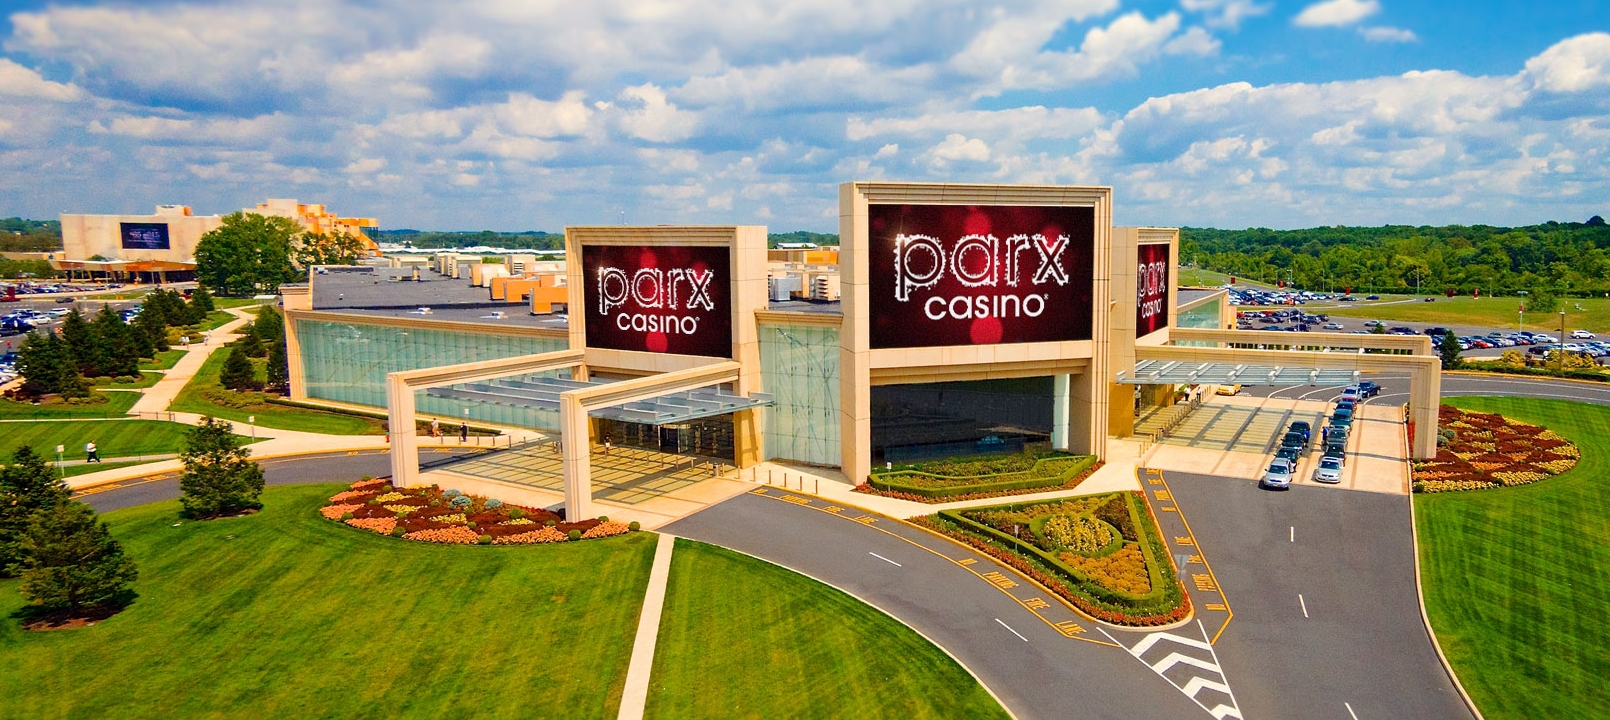 Parx Casino Expands Gaming Floor with a 40,000 Square Foot Addition…